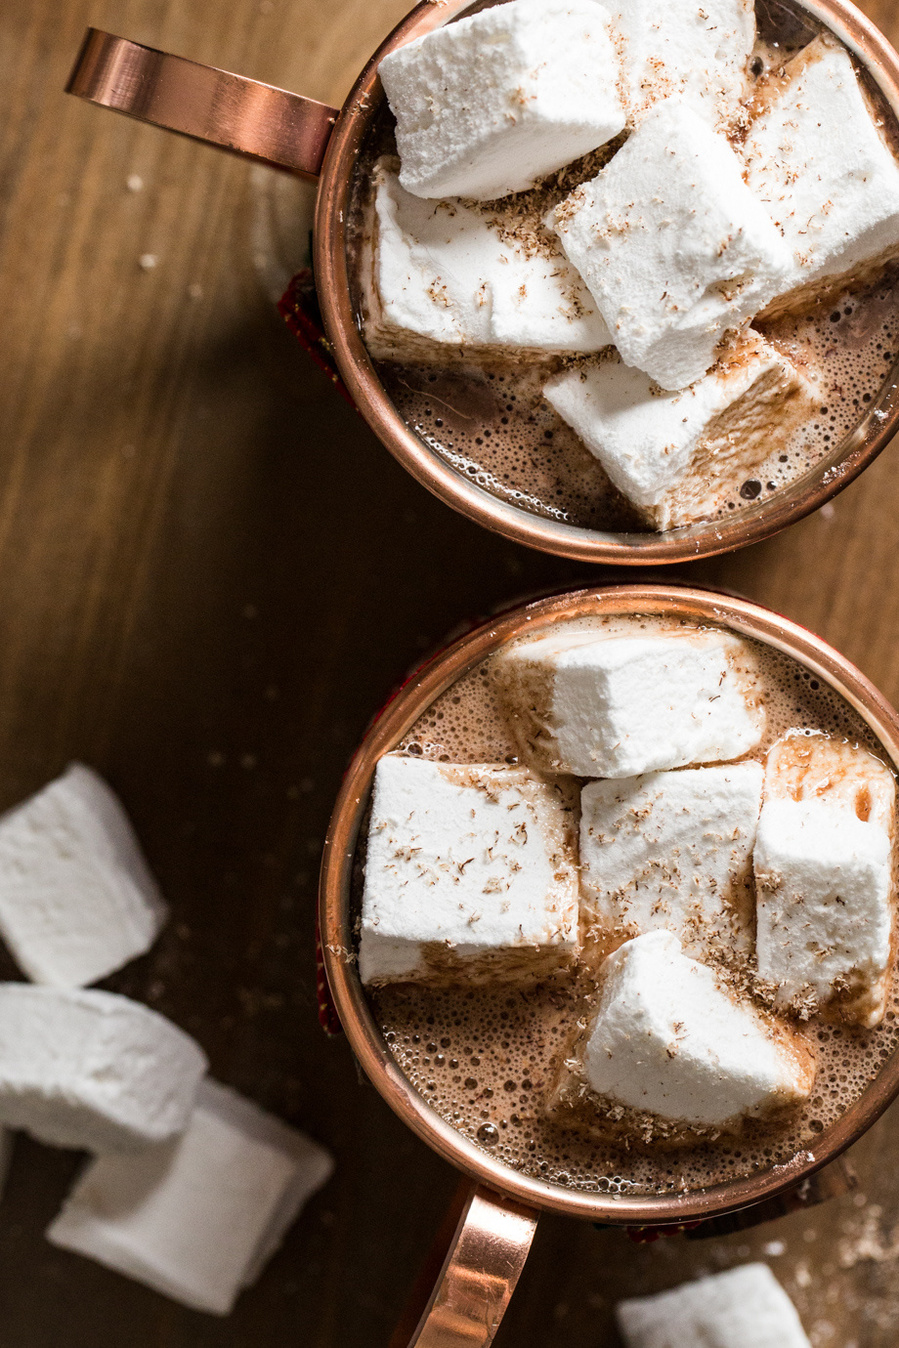 Overhead drink photography of two copper mugs filled with hot chocolate and heaped with homemade marshmallow cubes